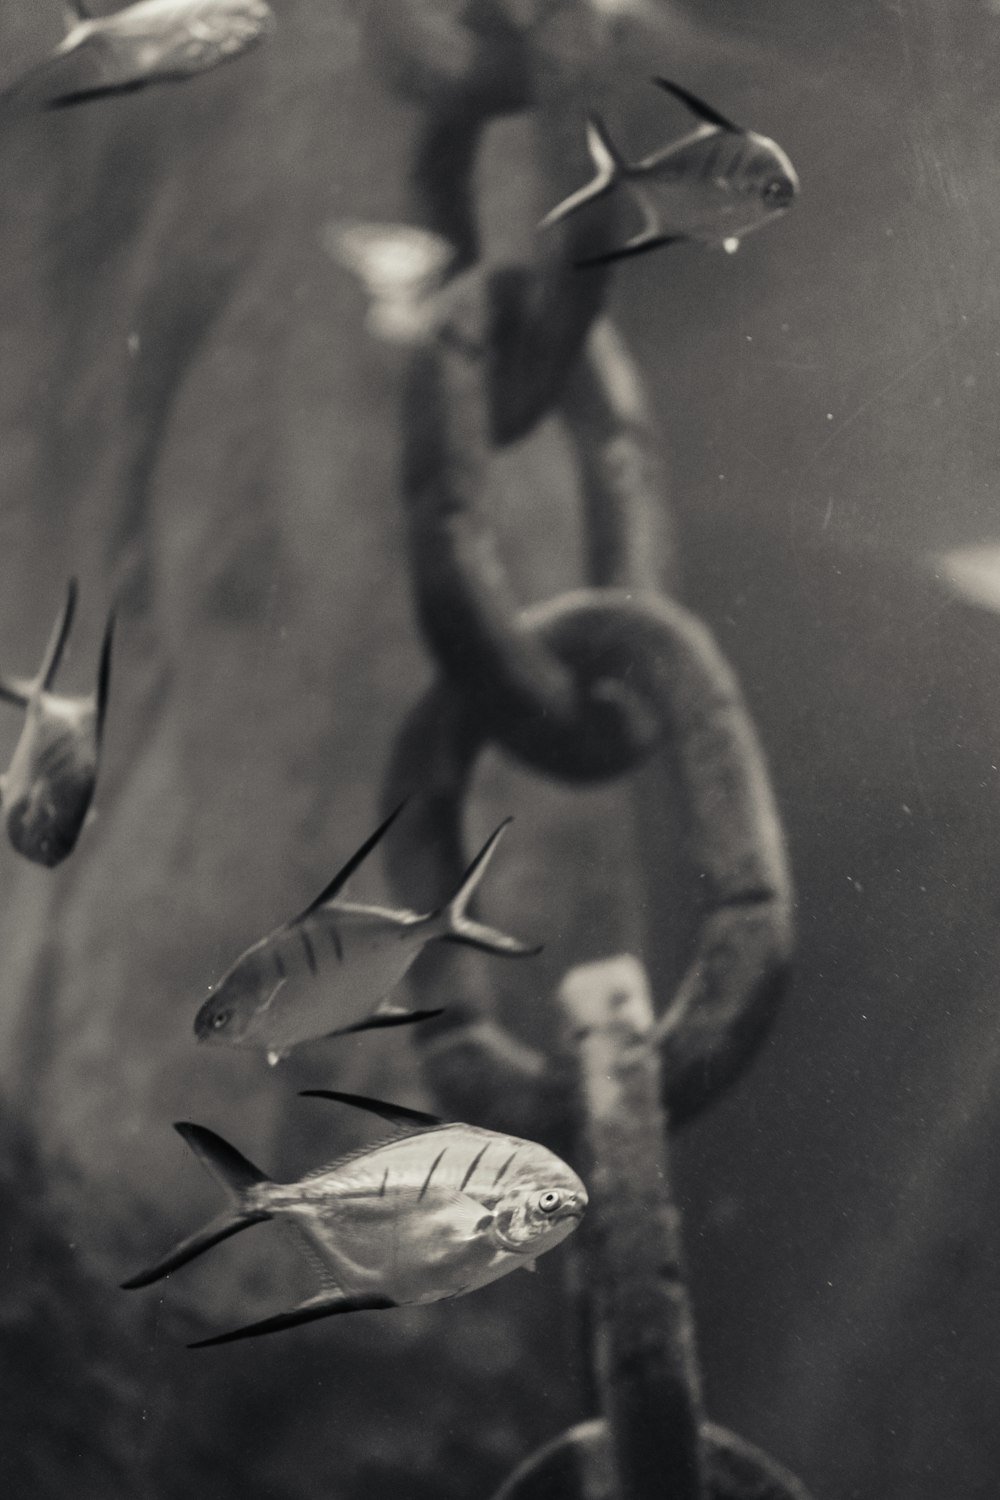 black and white photograph of a chain link and fish